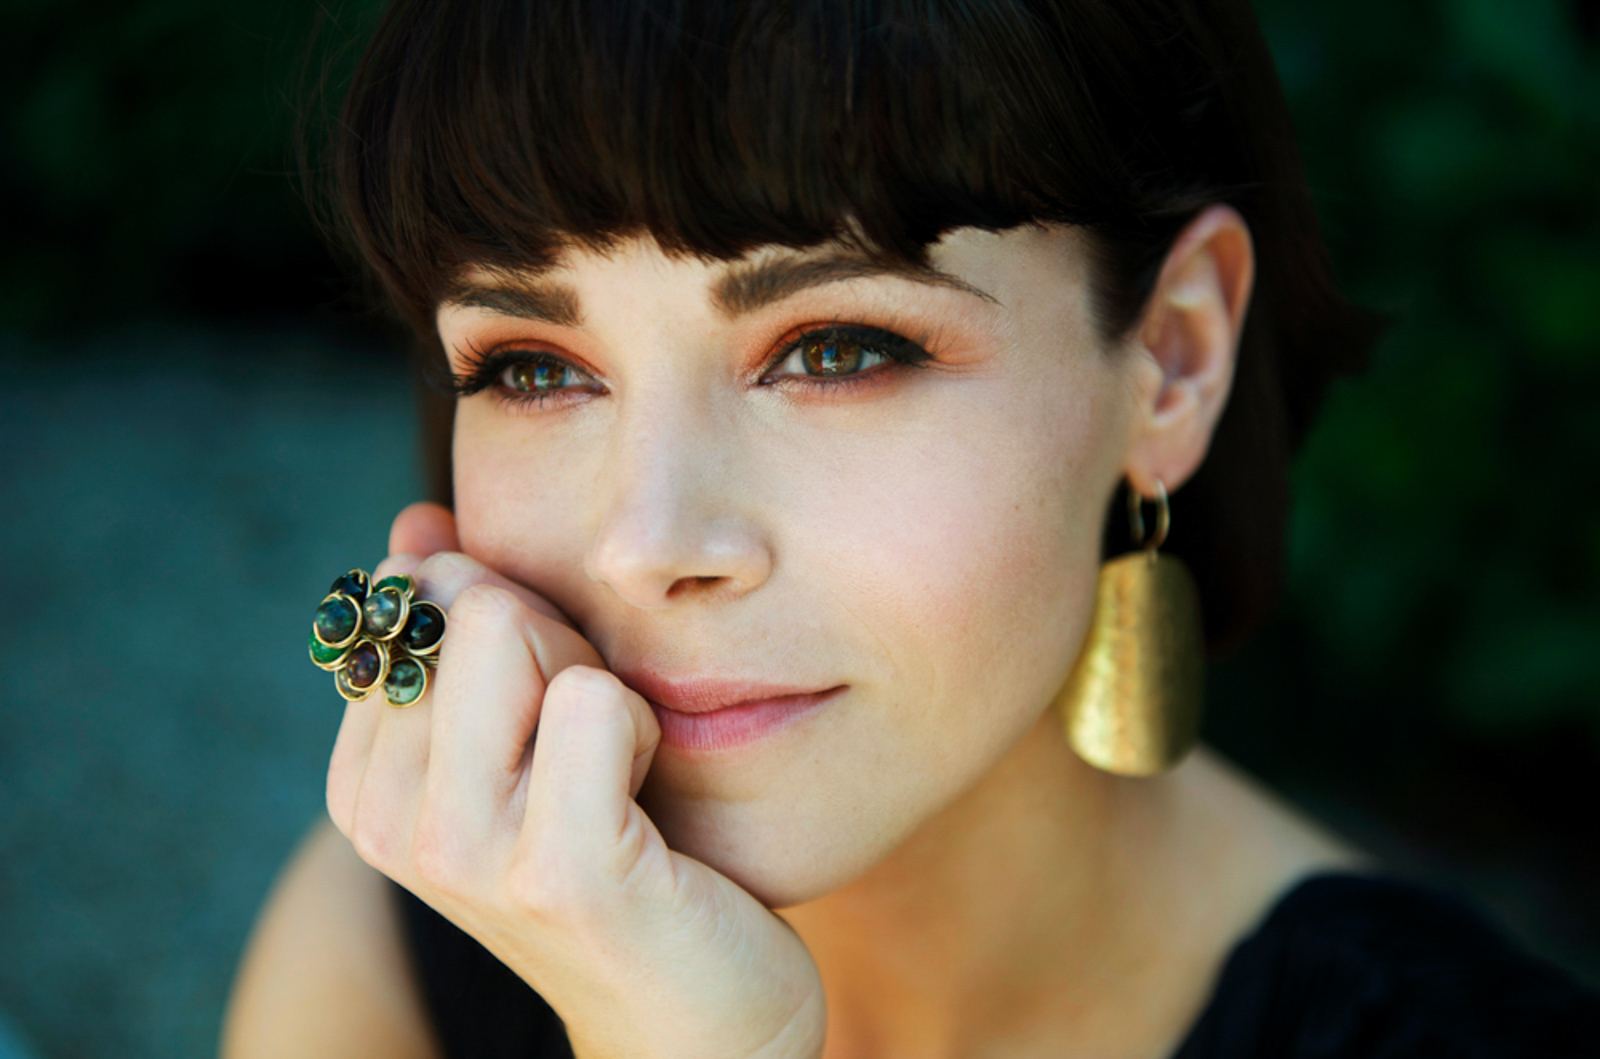 Portrait of woman with earrings and flower ring looking pensive